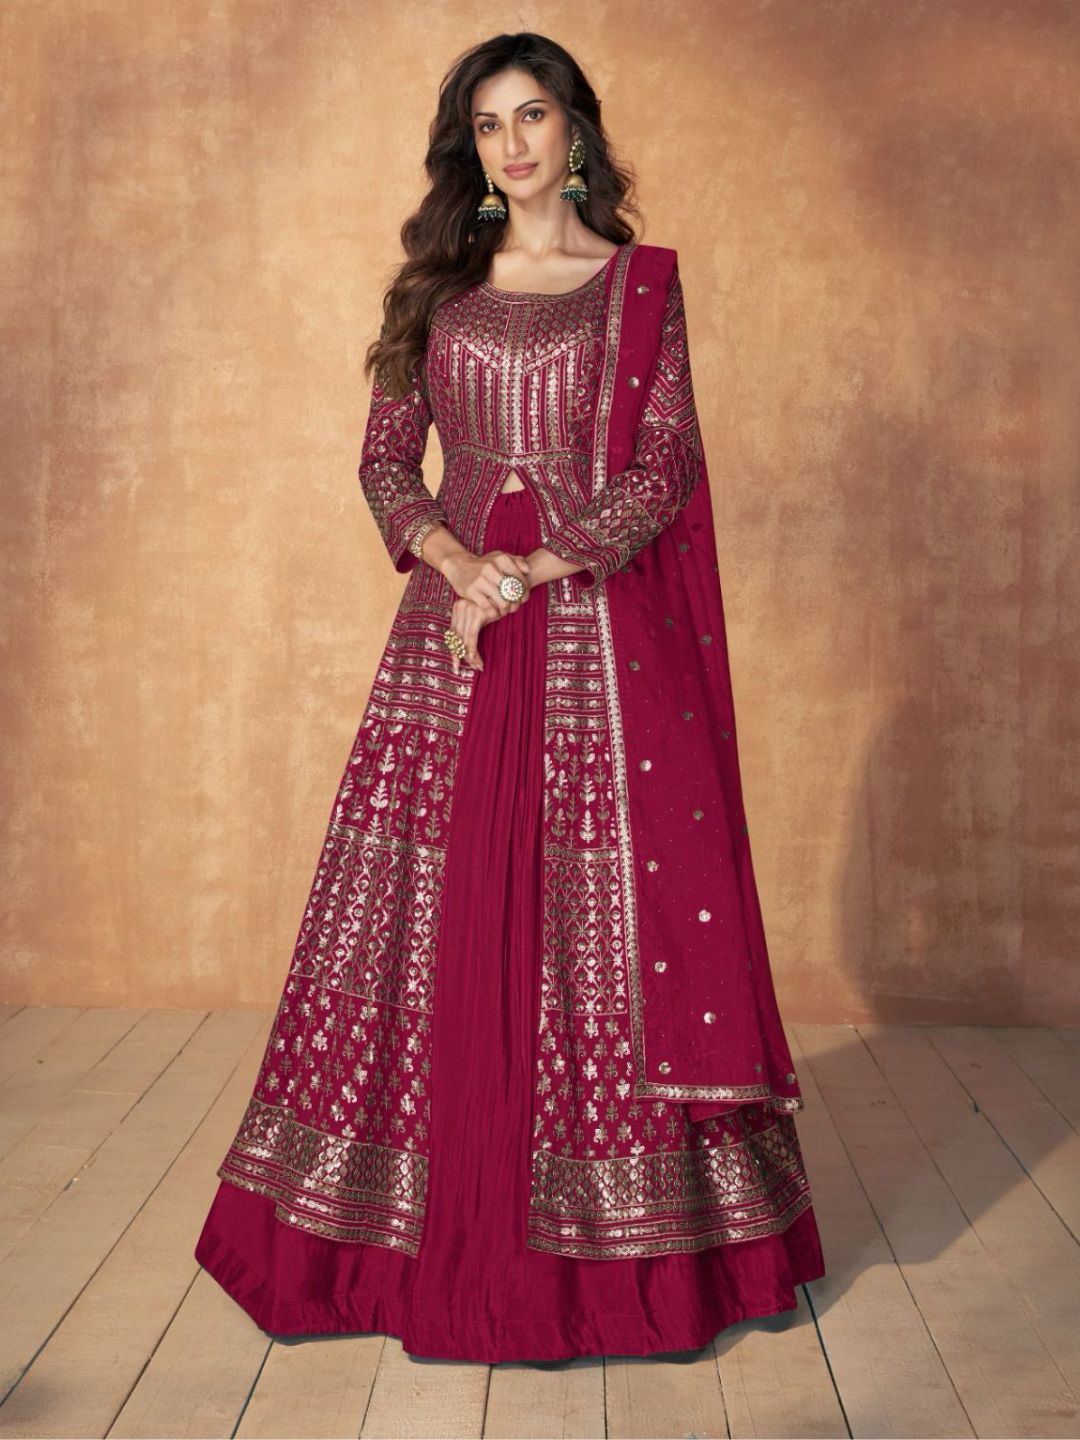 Georgette Embroidered Bollywood Salwar Kameez in Red with Stone work-81978